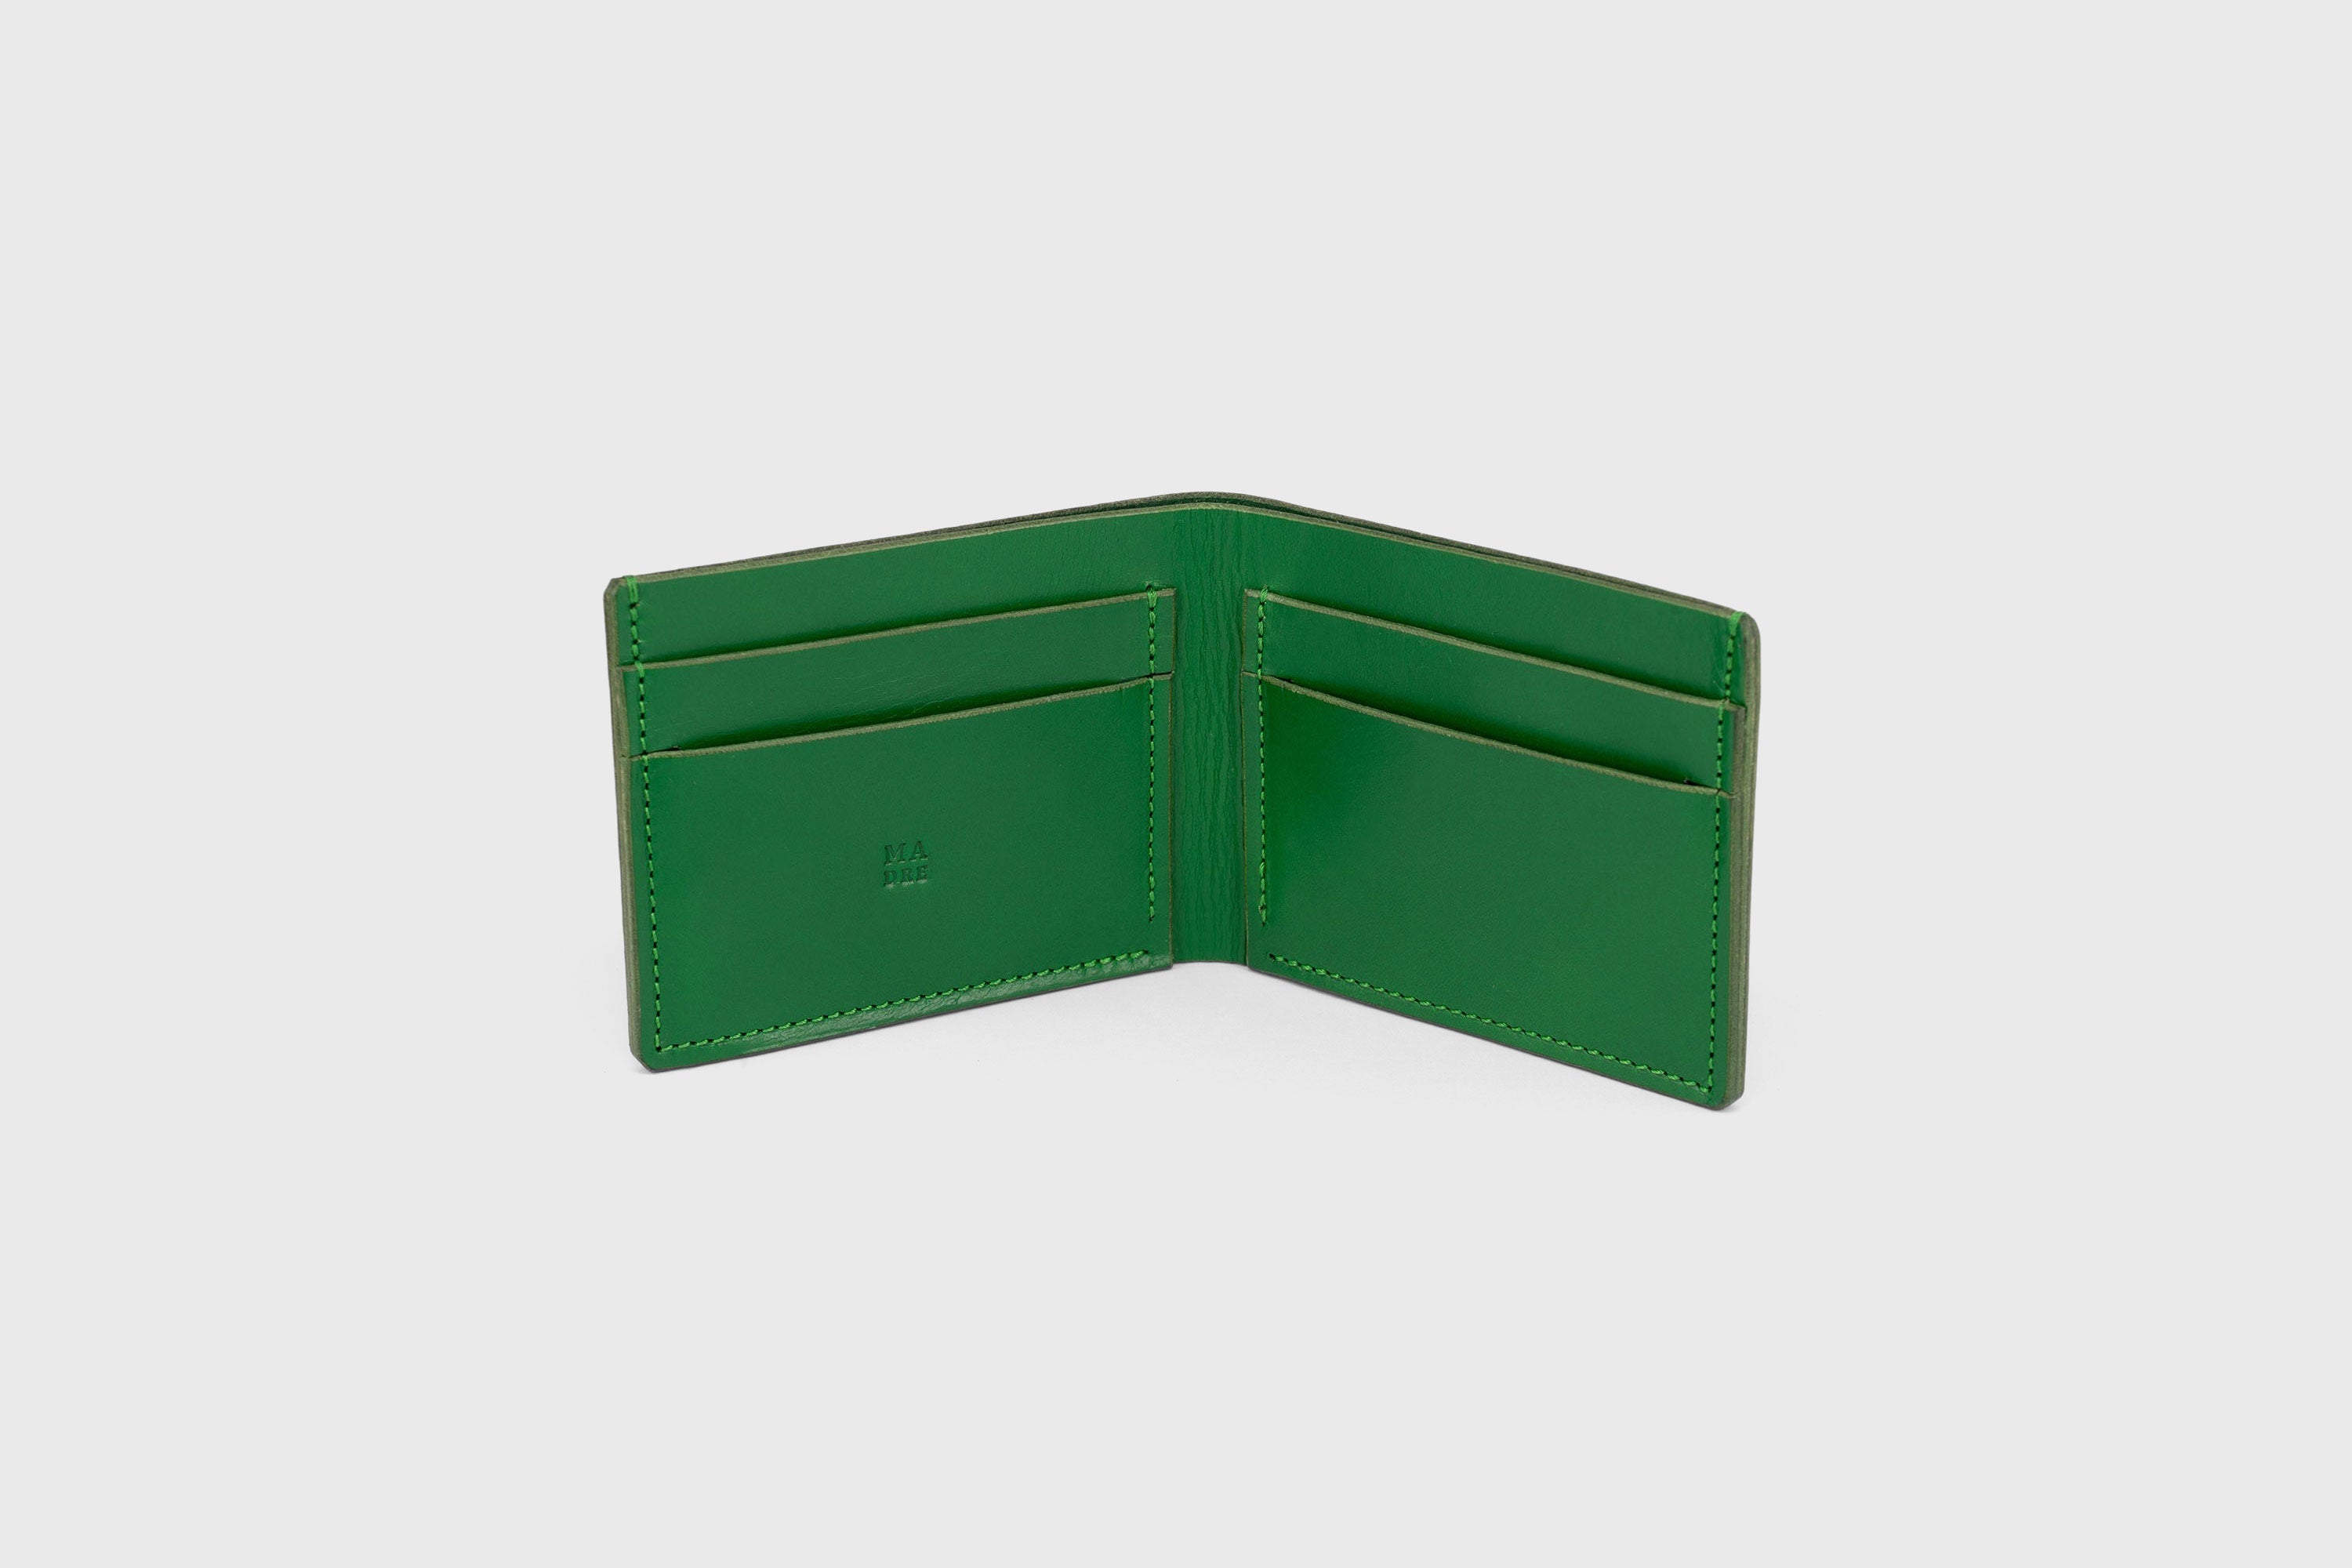 Bifold Wallet Grass Green Leather Vegetable Tanned Leather Premium Classic Design and Handcrafted By Atelier Madre Manuel Dreeesmann Barcelona Spain